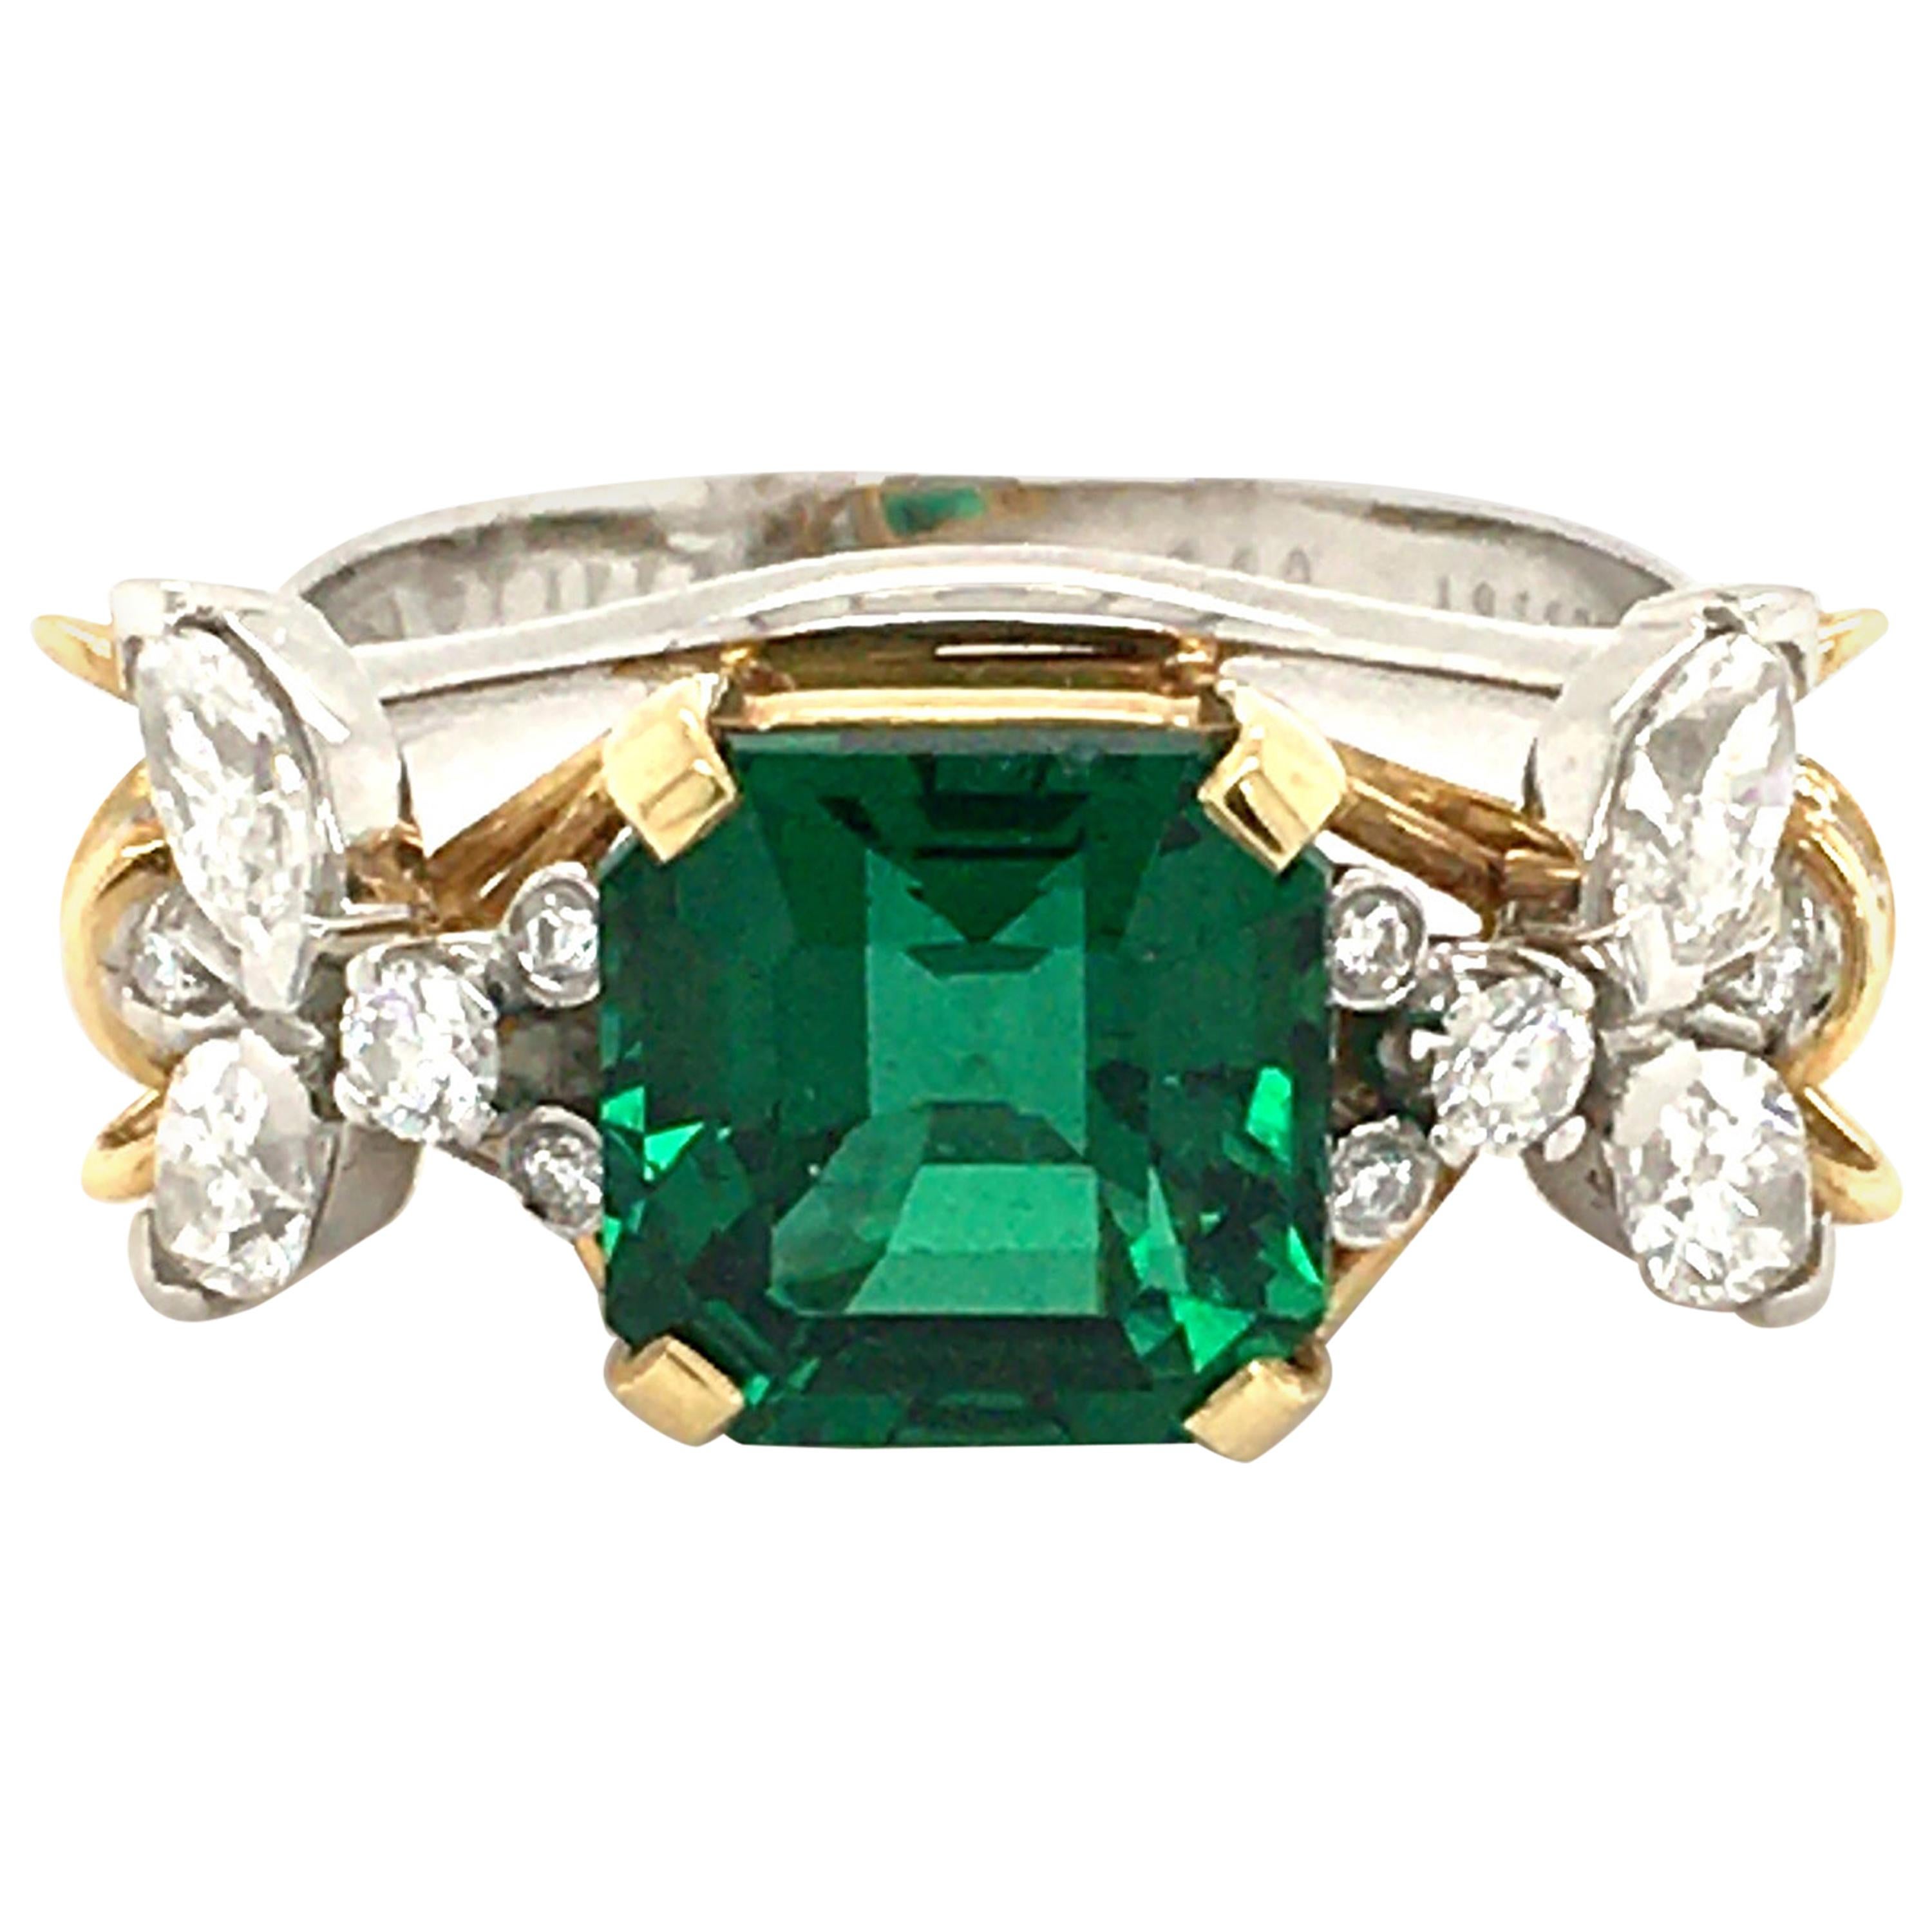 Emerald and Diamond 'Two Bees' Ring, by Jean Schlumberger for Tiffany & Co. For Sale